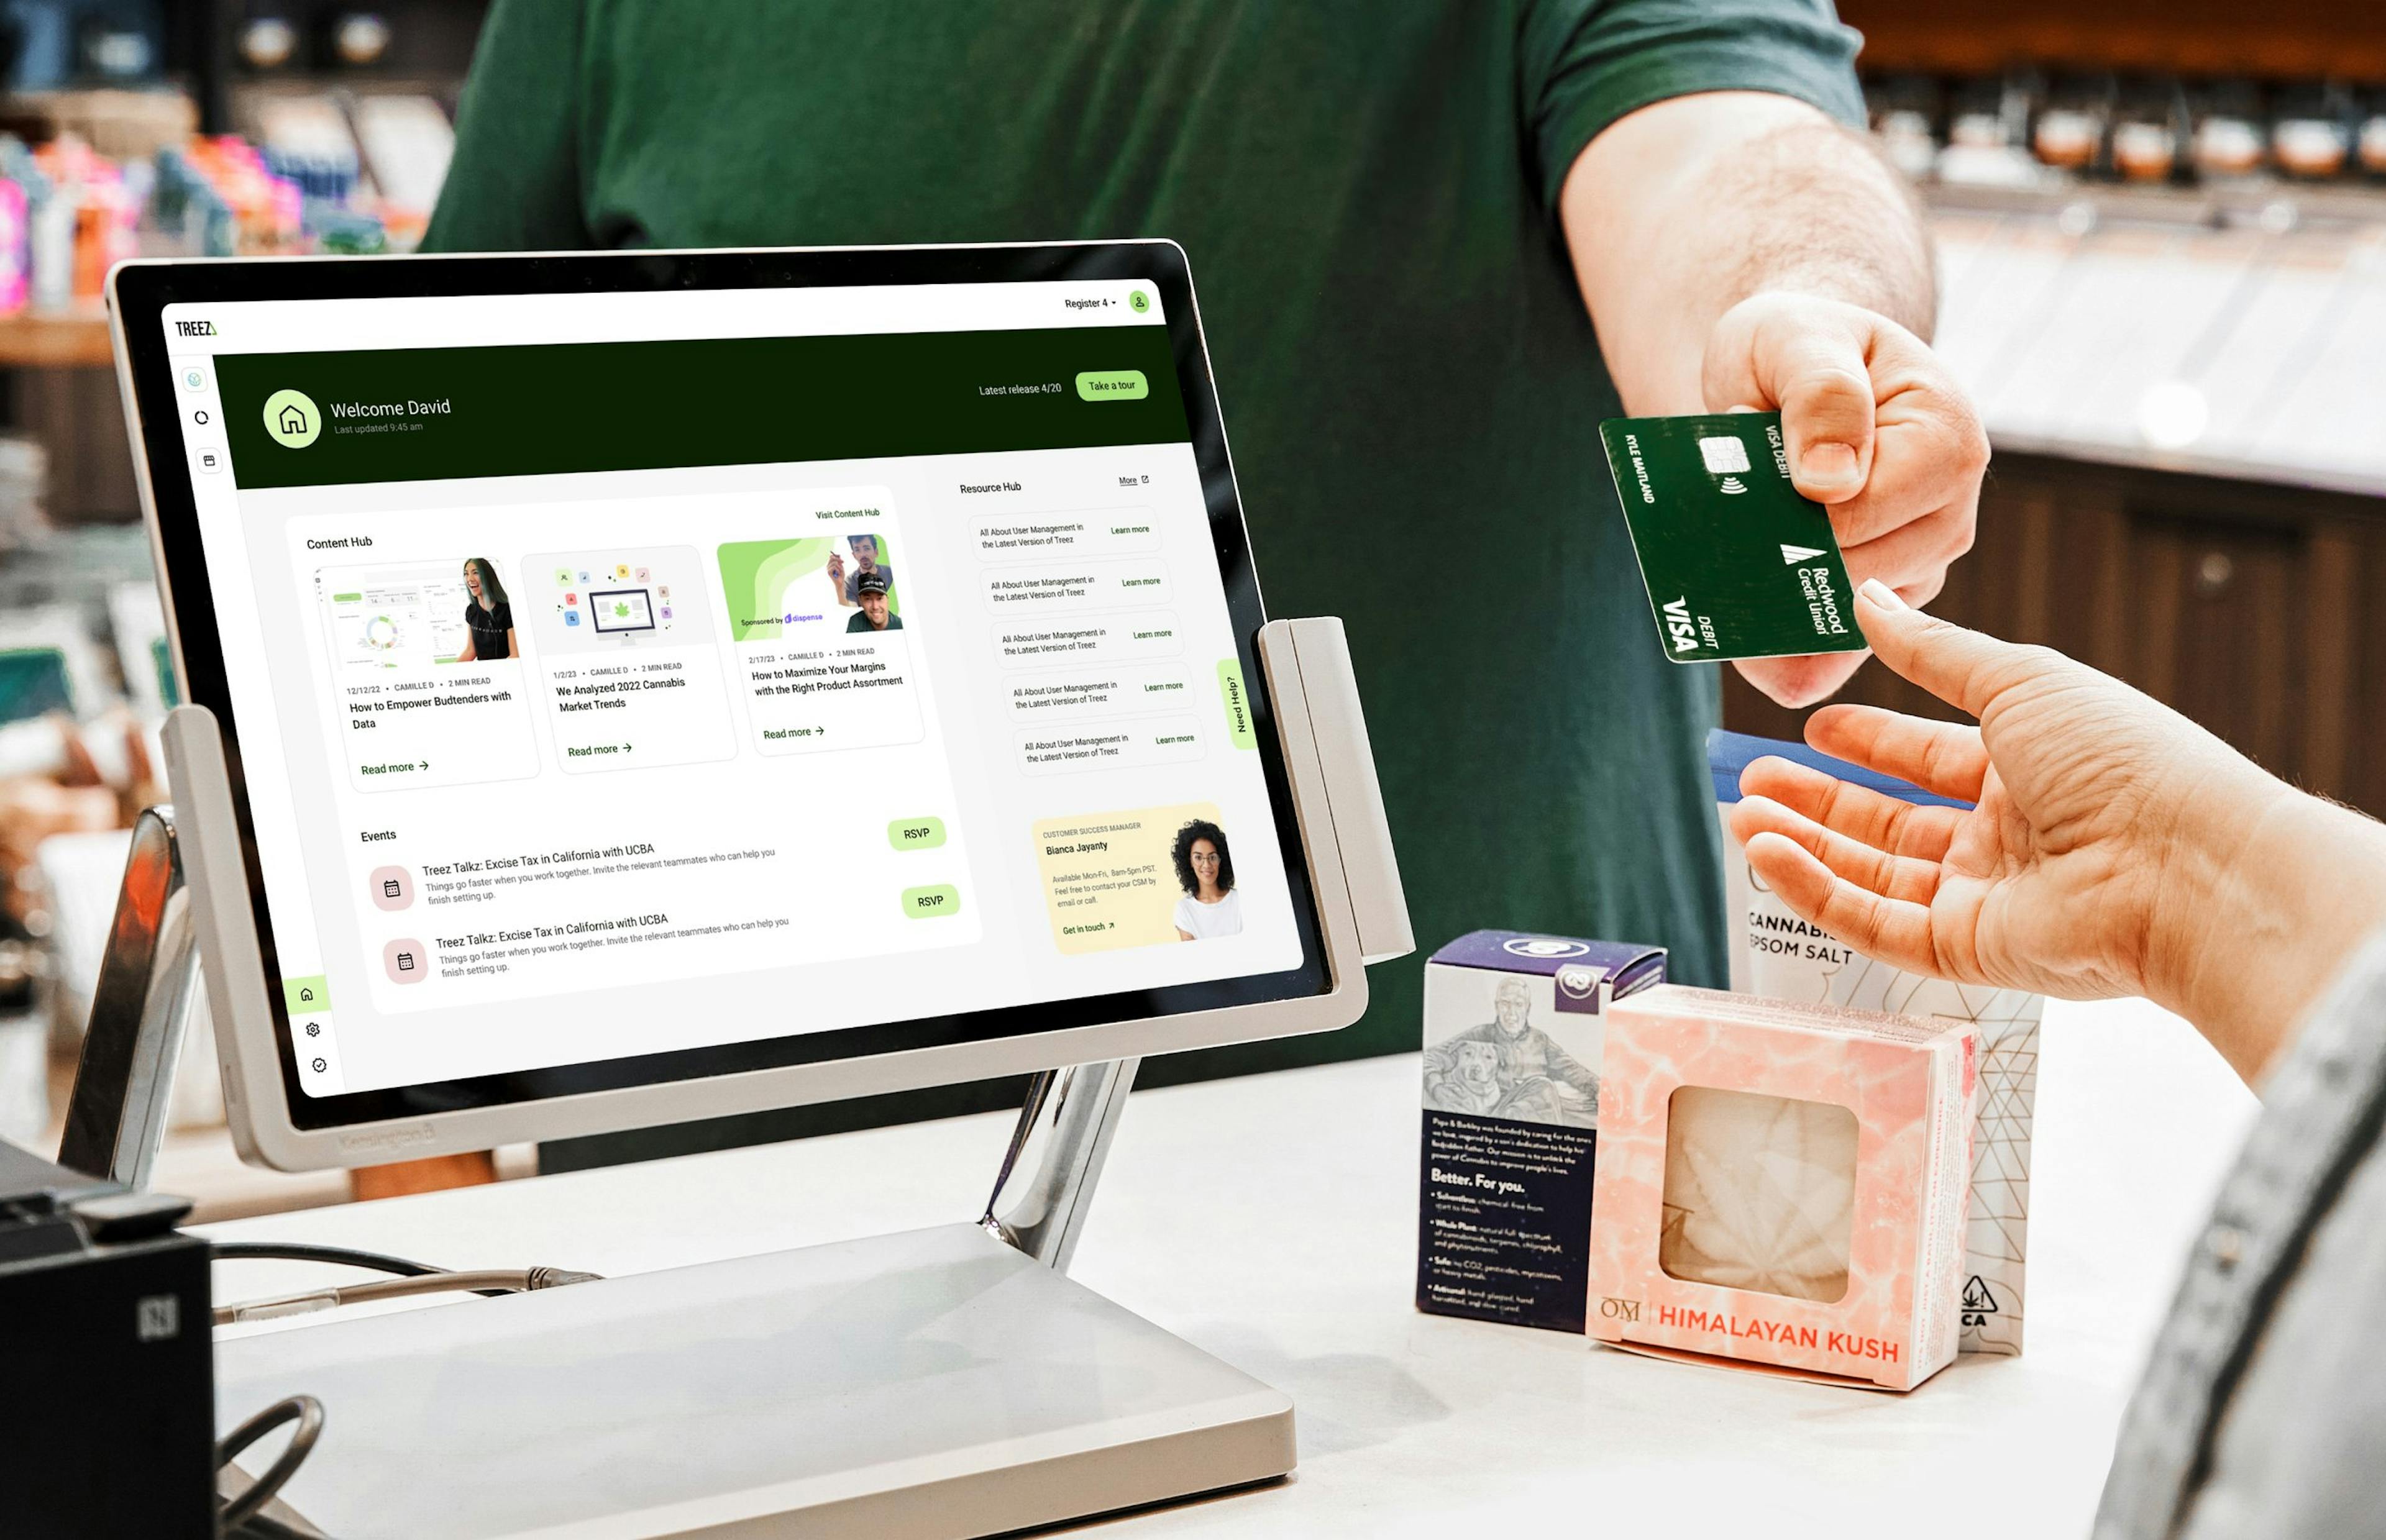 Two hands and a point of sale system are shown as a customer purchases some cannabis products at a dispensary